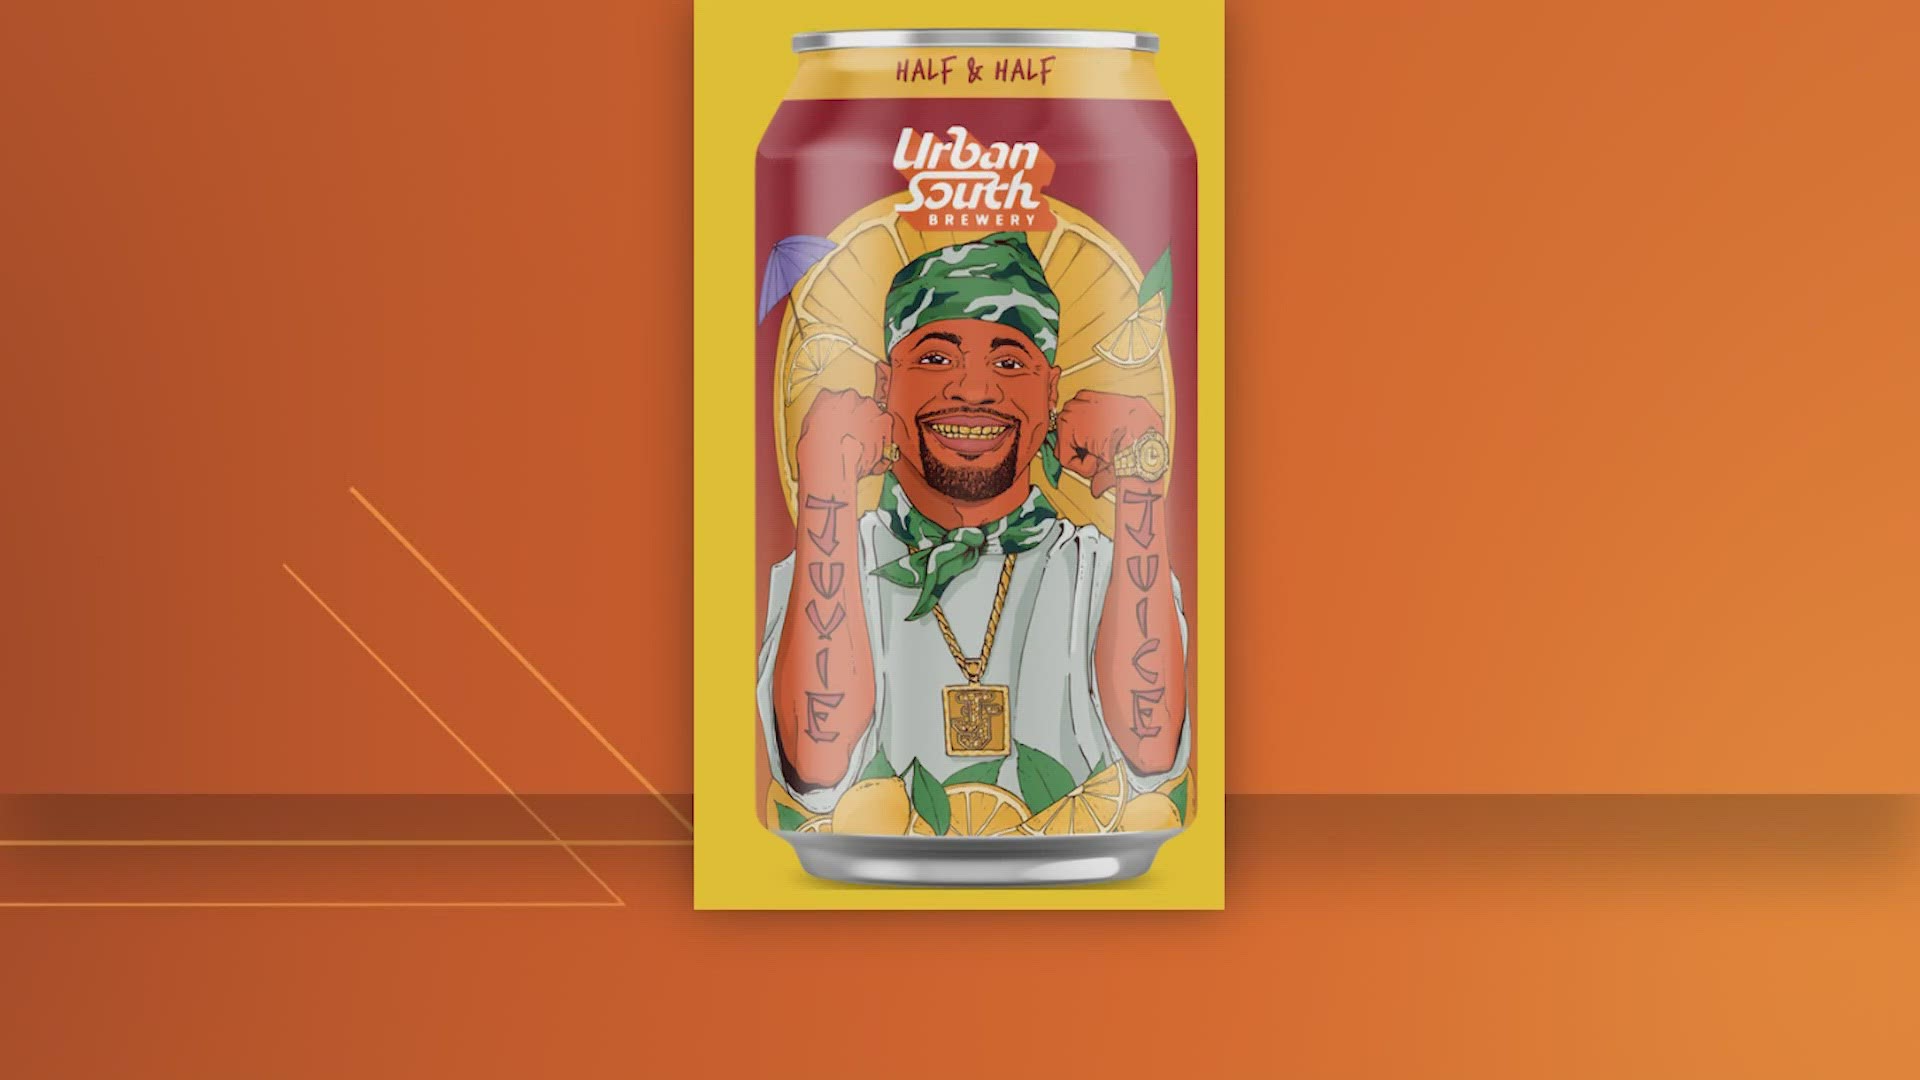 The New Orleans rapper unveiled his take on a spiked "Arnold Palmer" earlier this year.